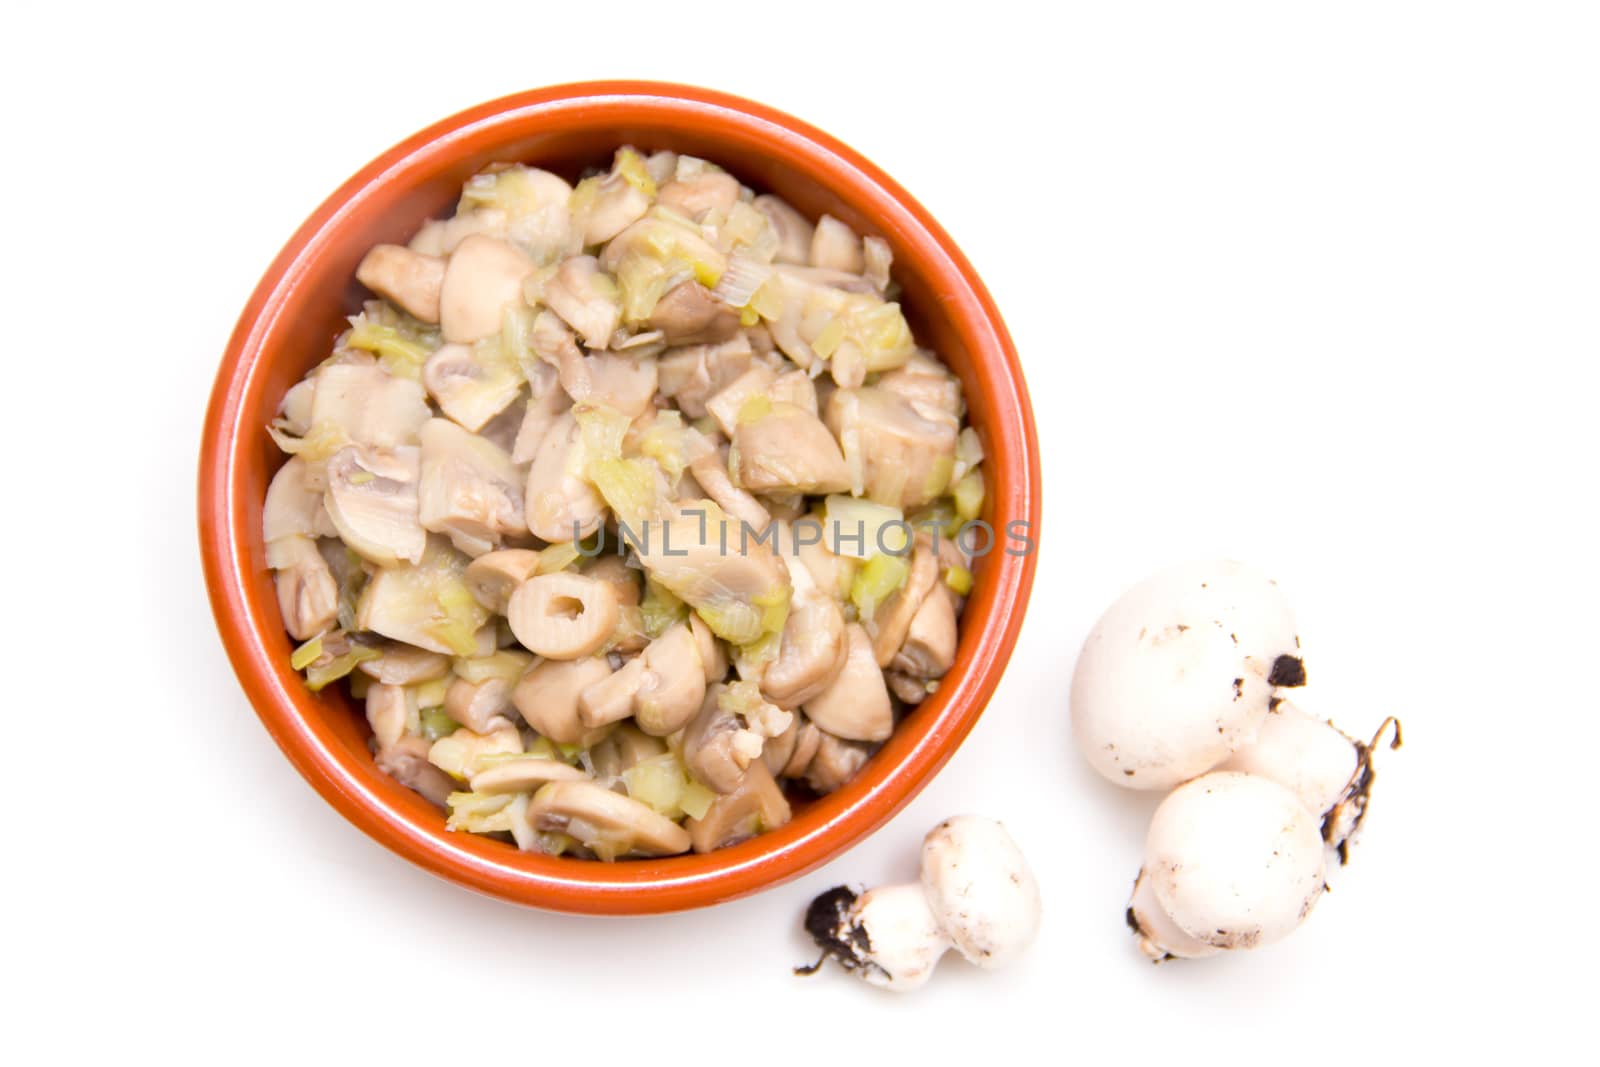 Grilled Mushrooms on bowl on white background seen from above